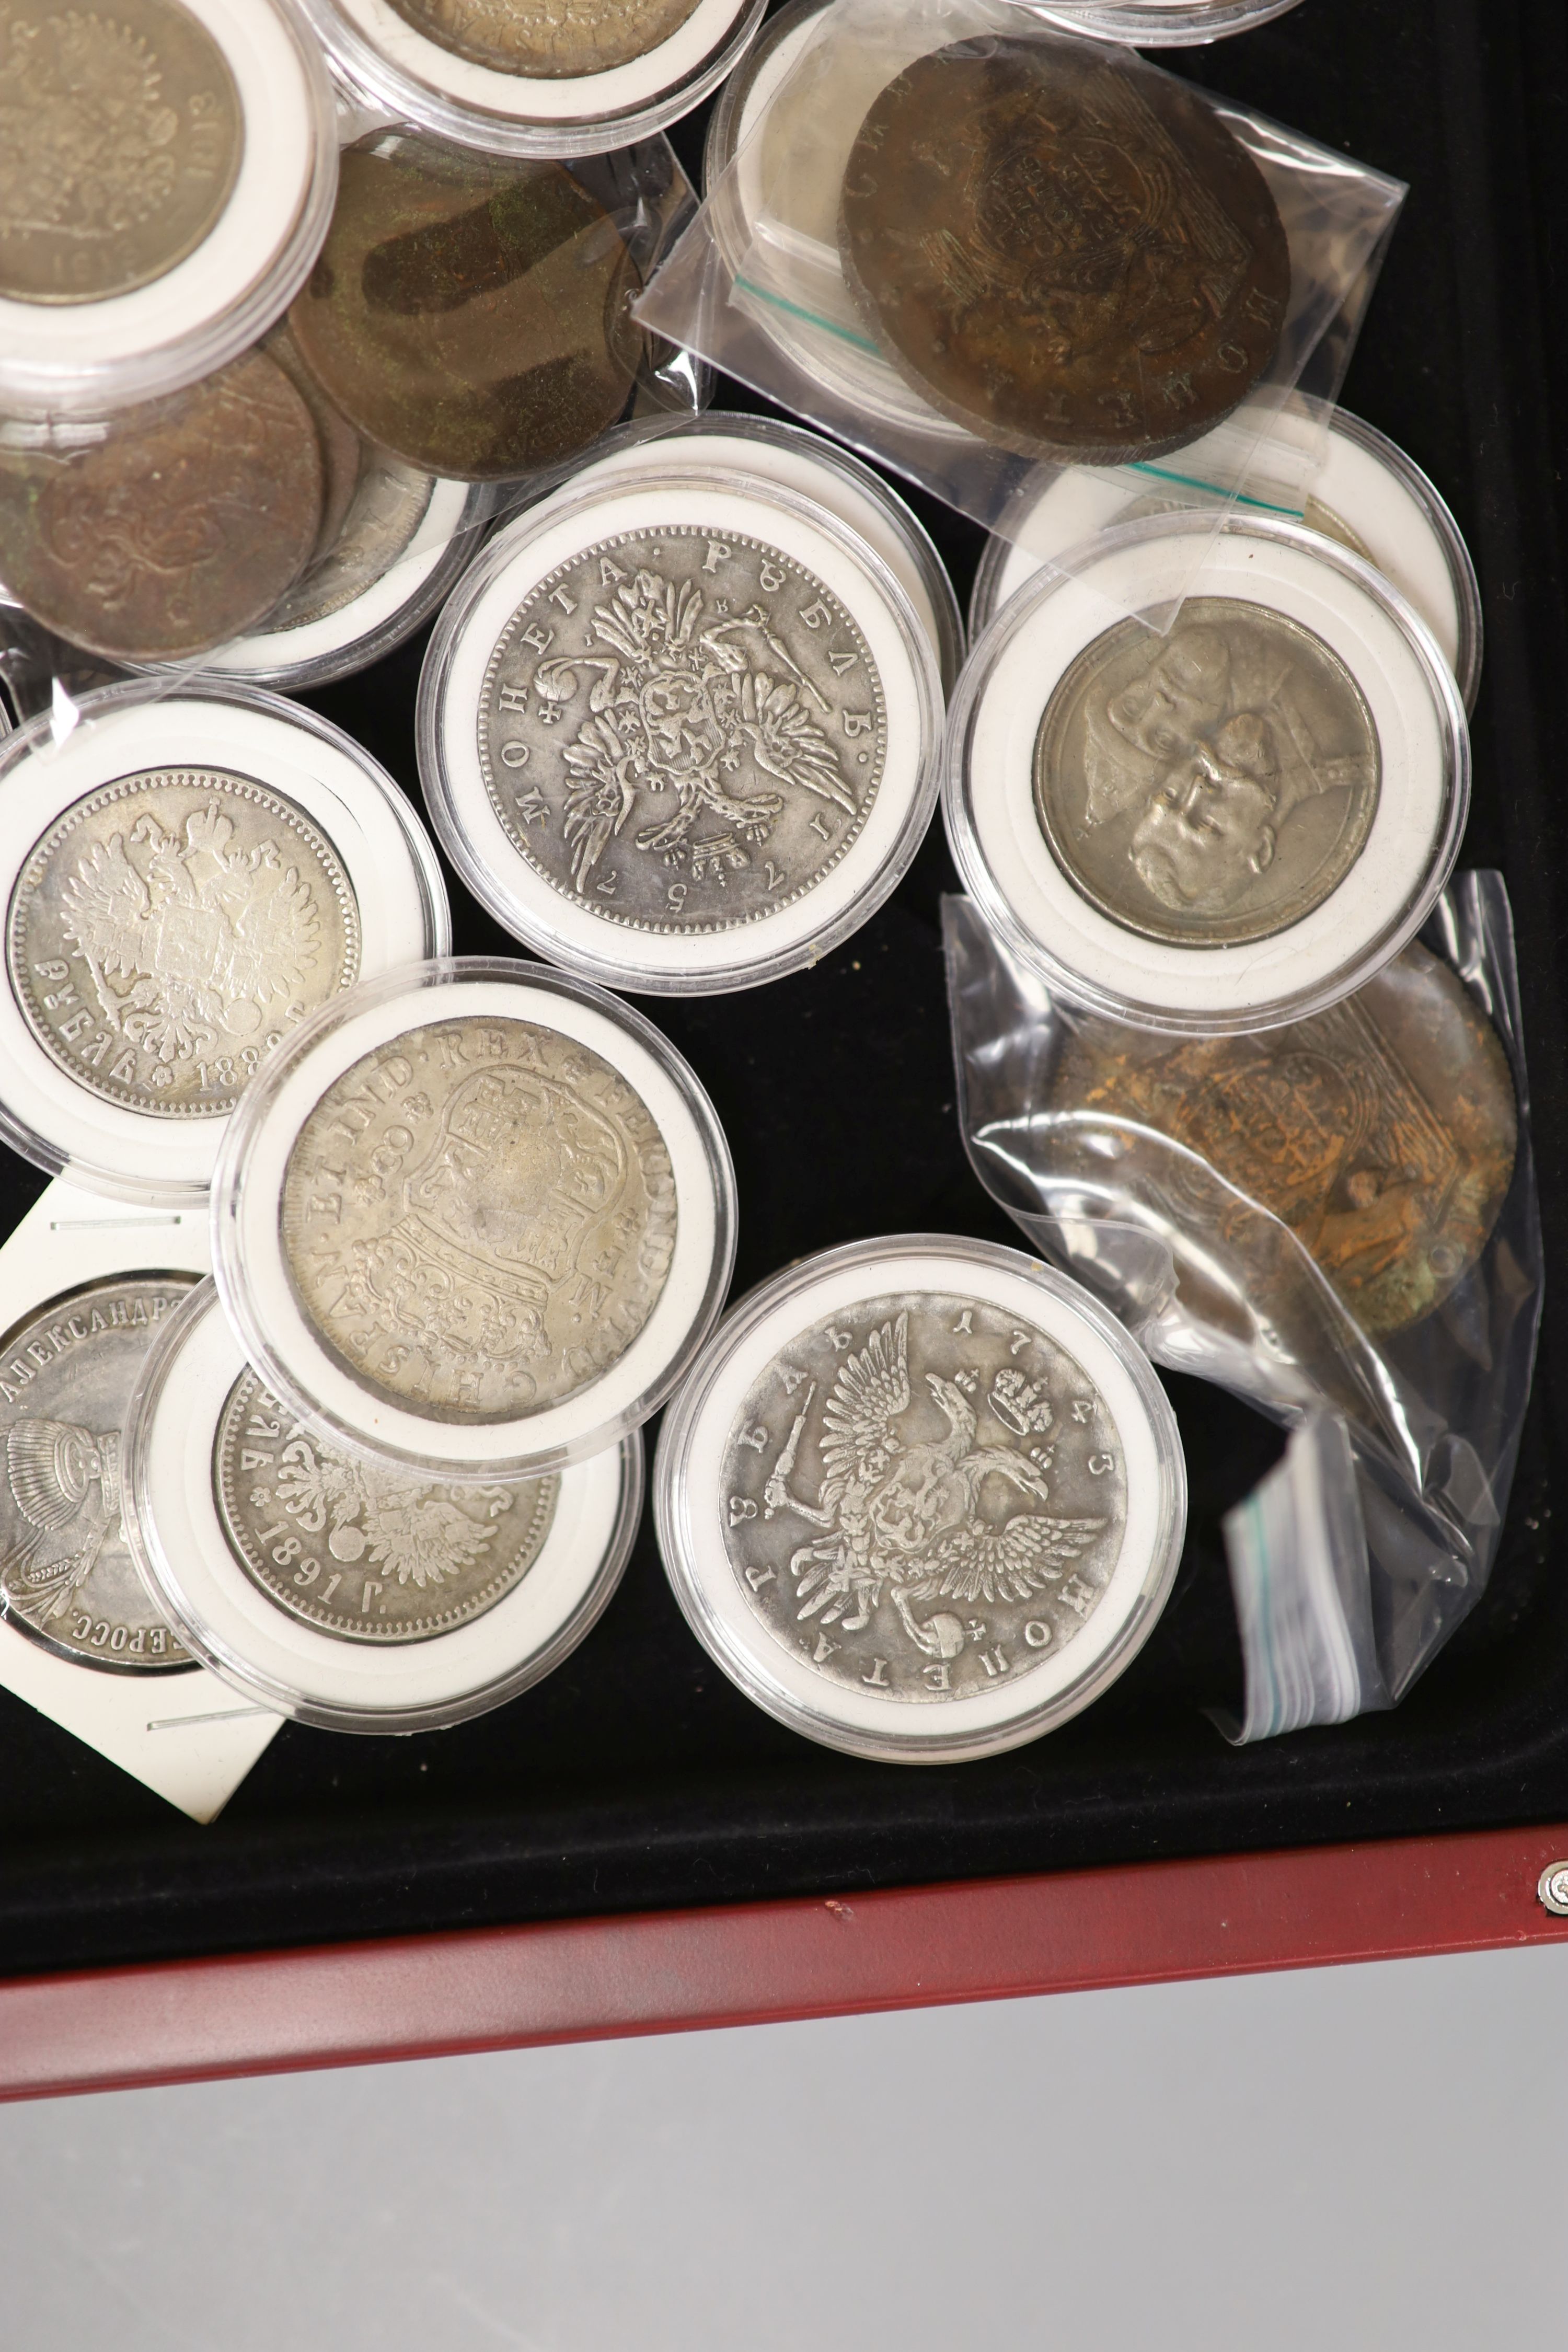 A collection of reproduction Russian coins